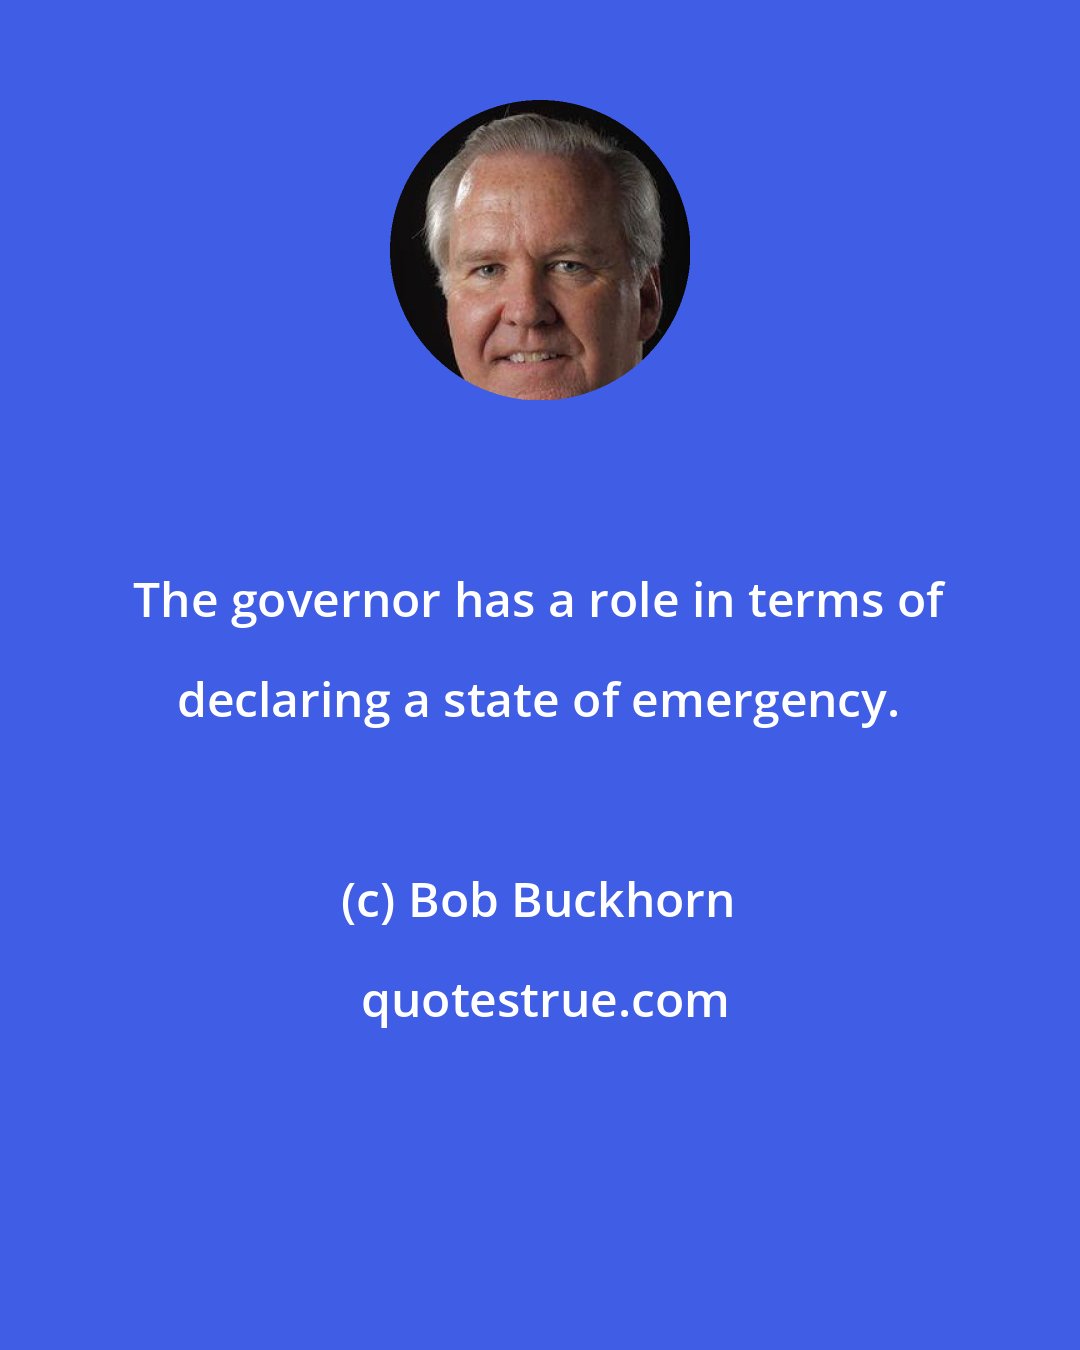 Bob Buckhorn: The governor has a role in terms of declaring a state of emergency.